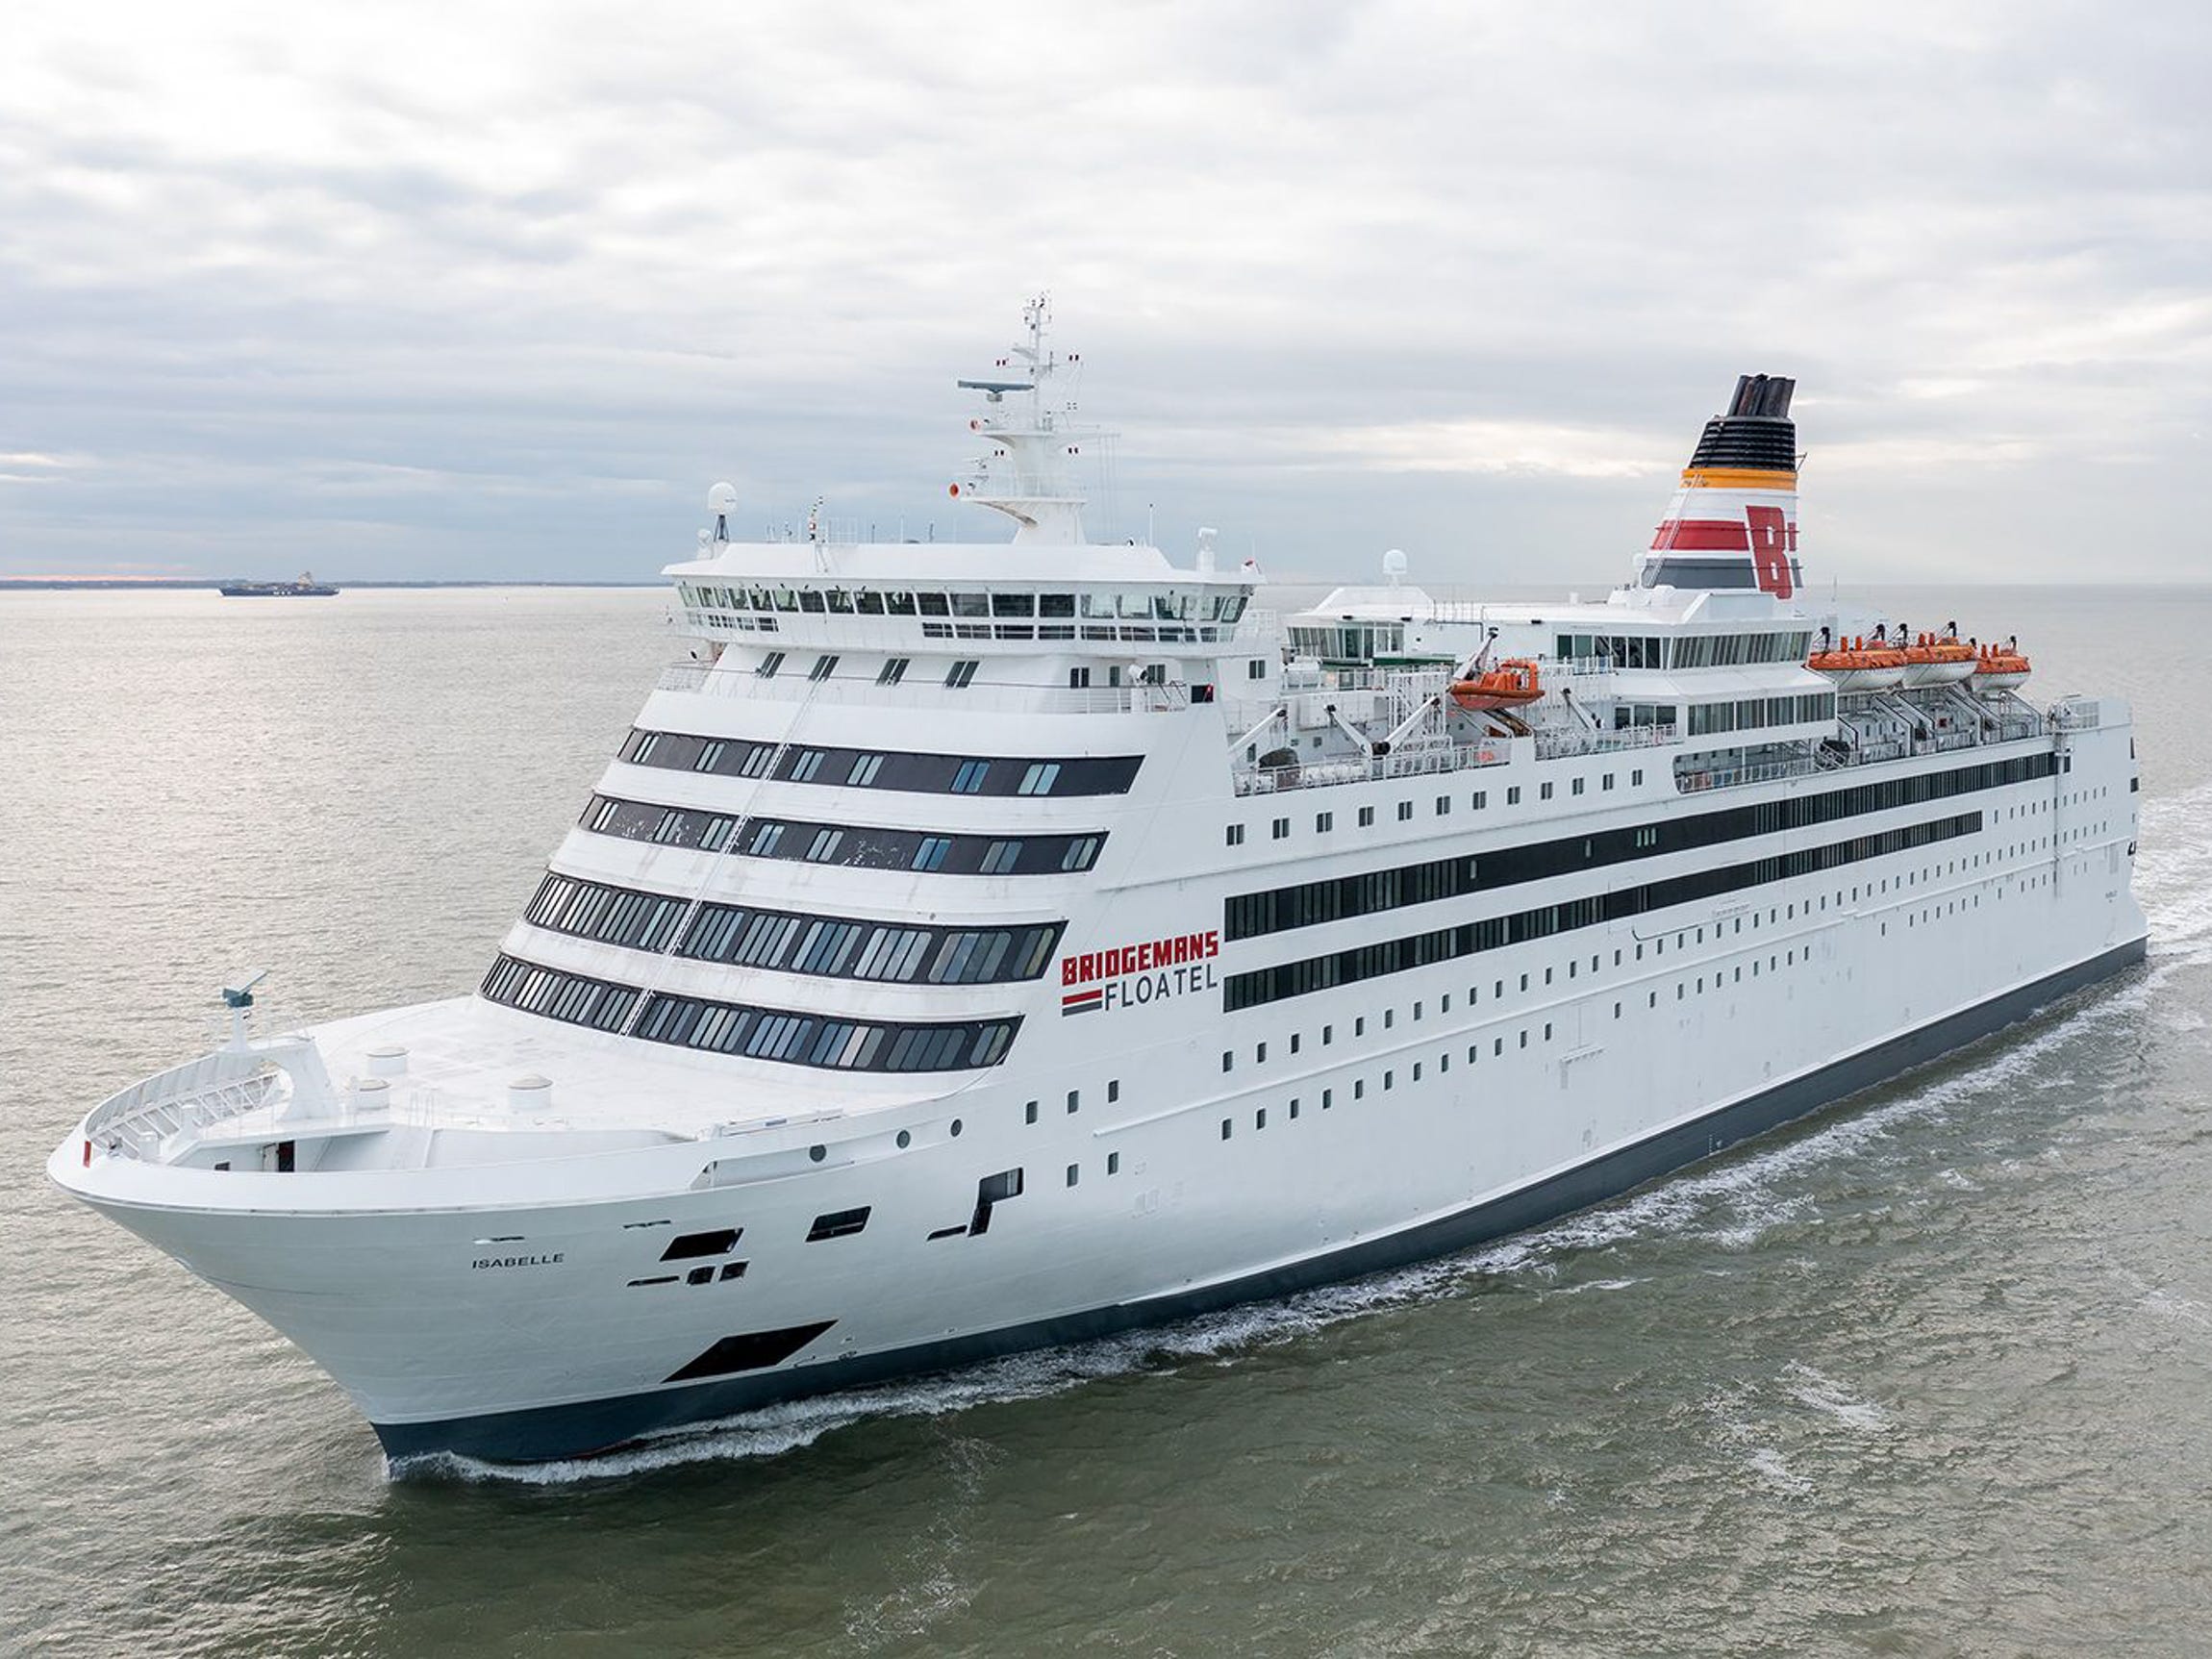 <p>The floatel operator acquired its largest ship, the 561-foot-long MV Isabelle X, in 2023.</p><p>In its past life, the <a href="https://www.tallink.com/fleet/cruise-vessels/isabelle#tabs-content-7">35-year-old</a> vessel sailed around the Baltic Sea as one of Estonia-based Tallink Gruipp's cruise ships.</p><p>But gone are its days of leisurely cruising. The 35,000 gross-ton ship is now on its first deployment in Howe Sound, just north of Vancouver, where it's housing more than 600 workers who are building Woodfibre LNG's "net zero" LNG export facility.</p>